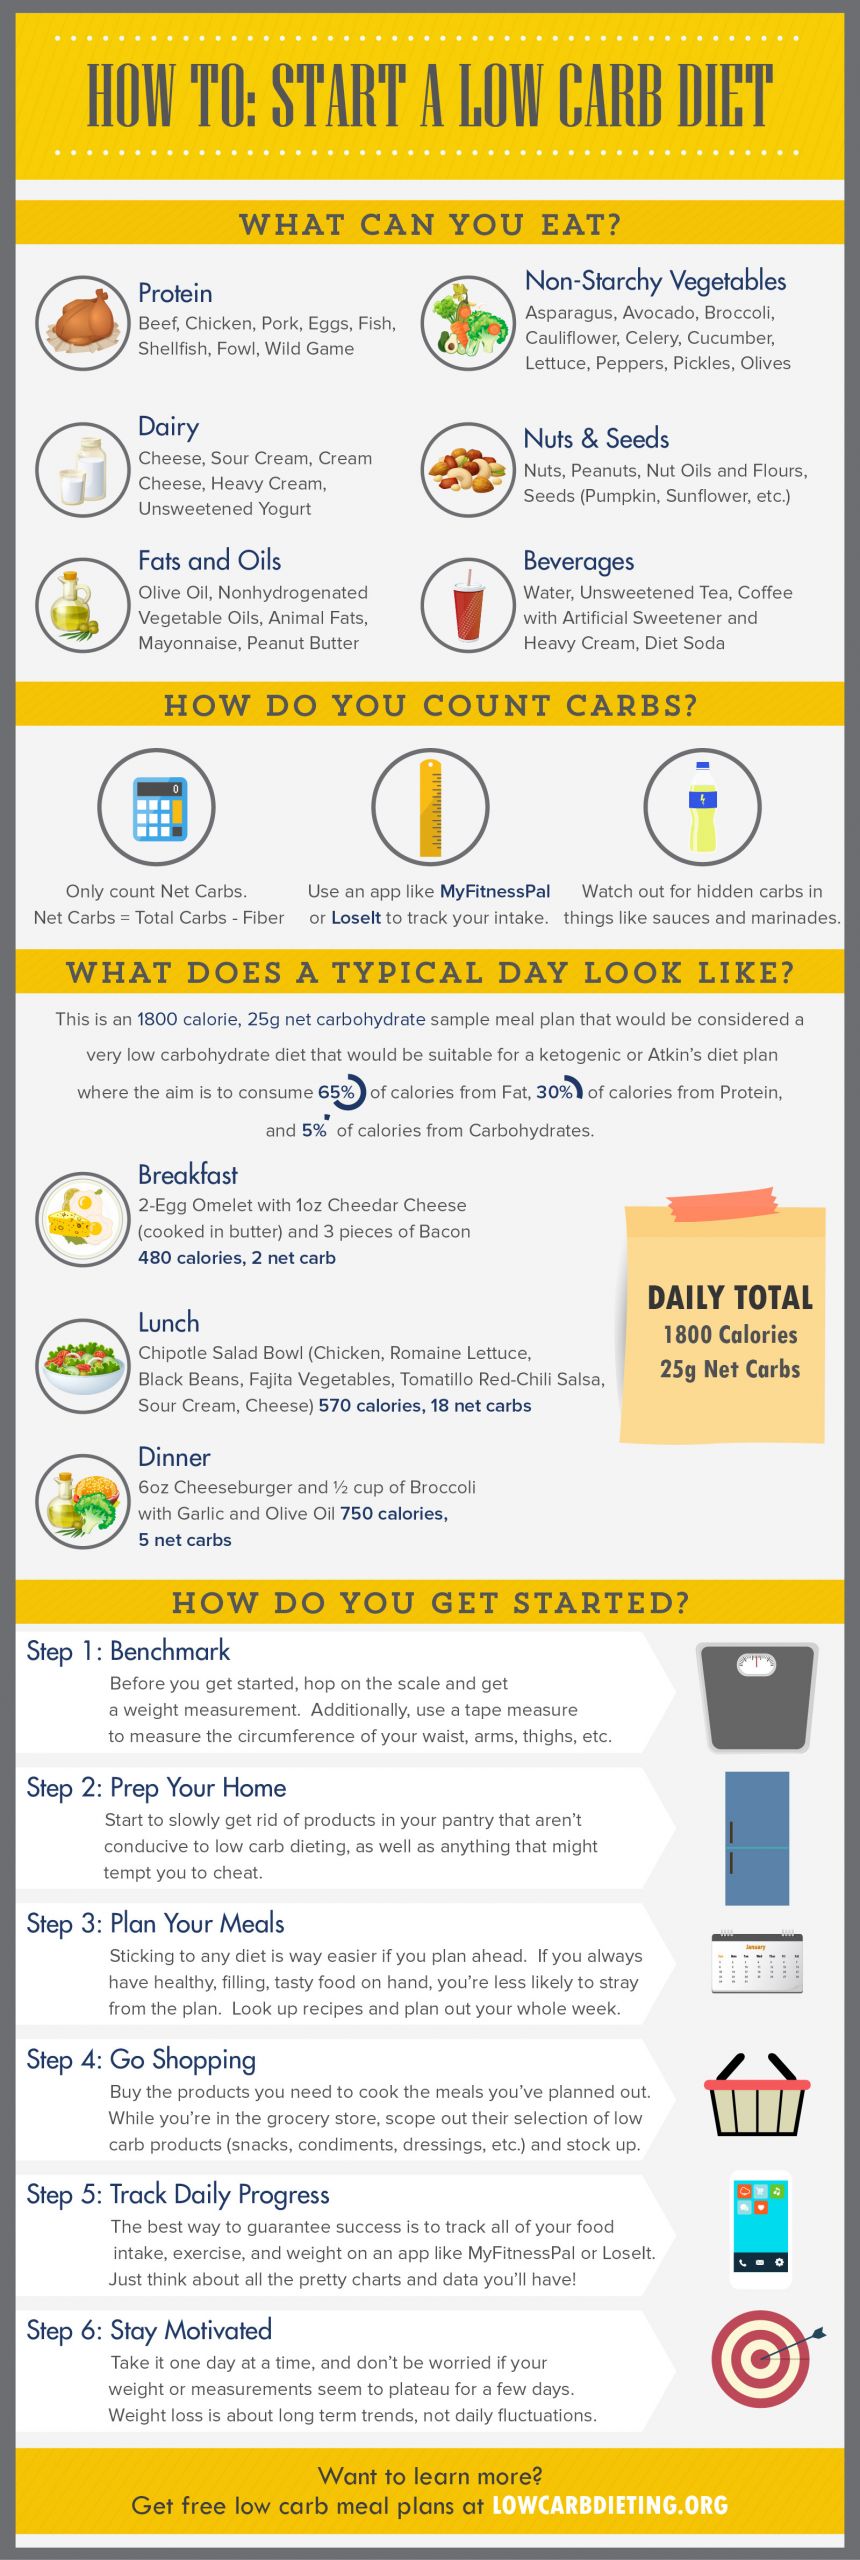 Starting Low Carb Diet
 How To Start a Low Carb Diet LowCarbDieting